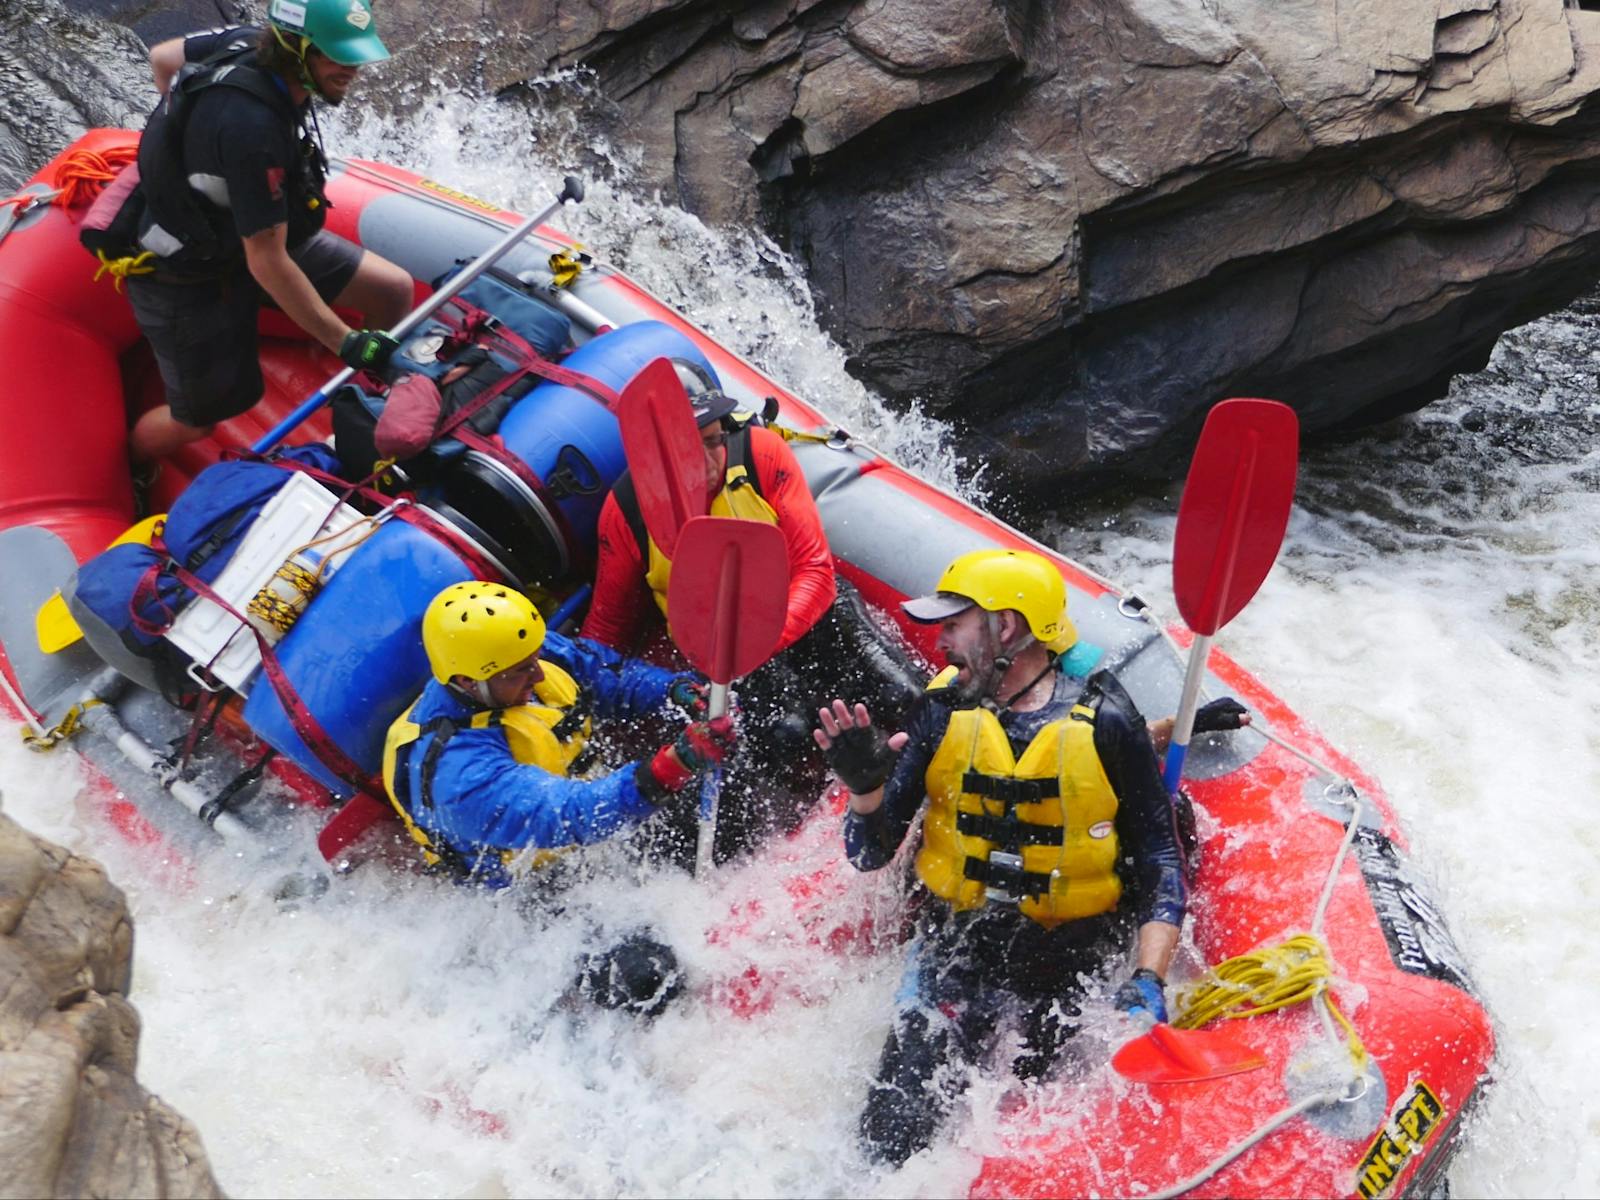 White water rafting action on the Franklin River